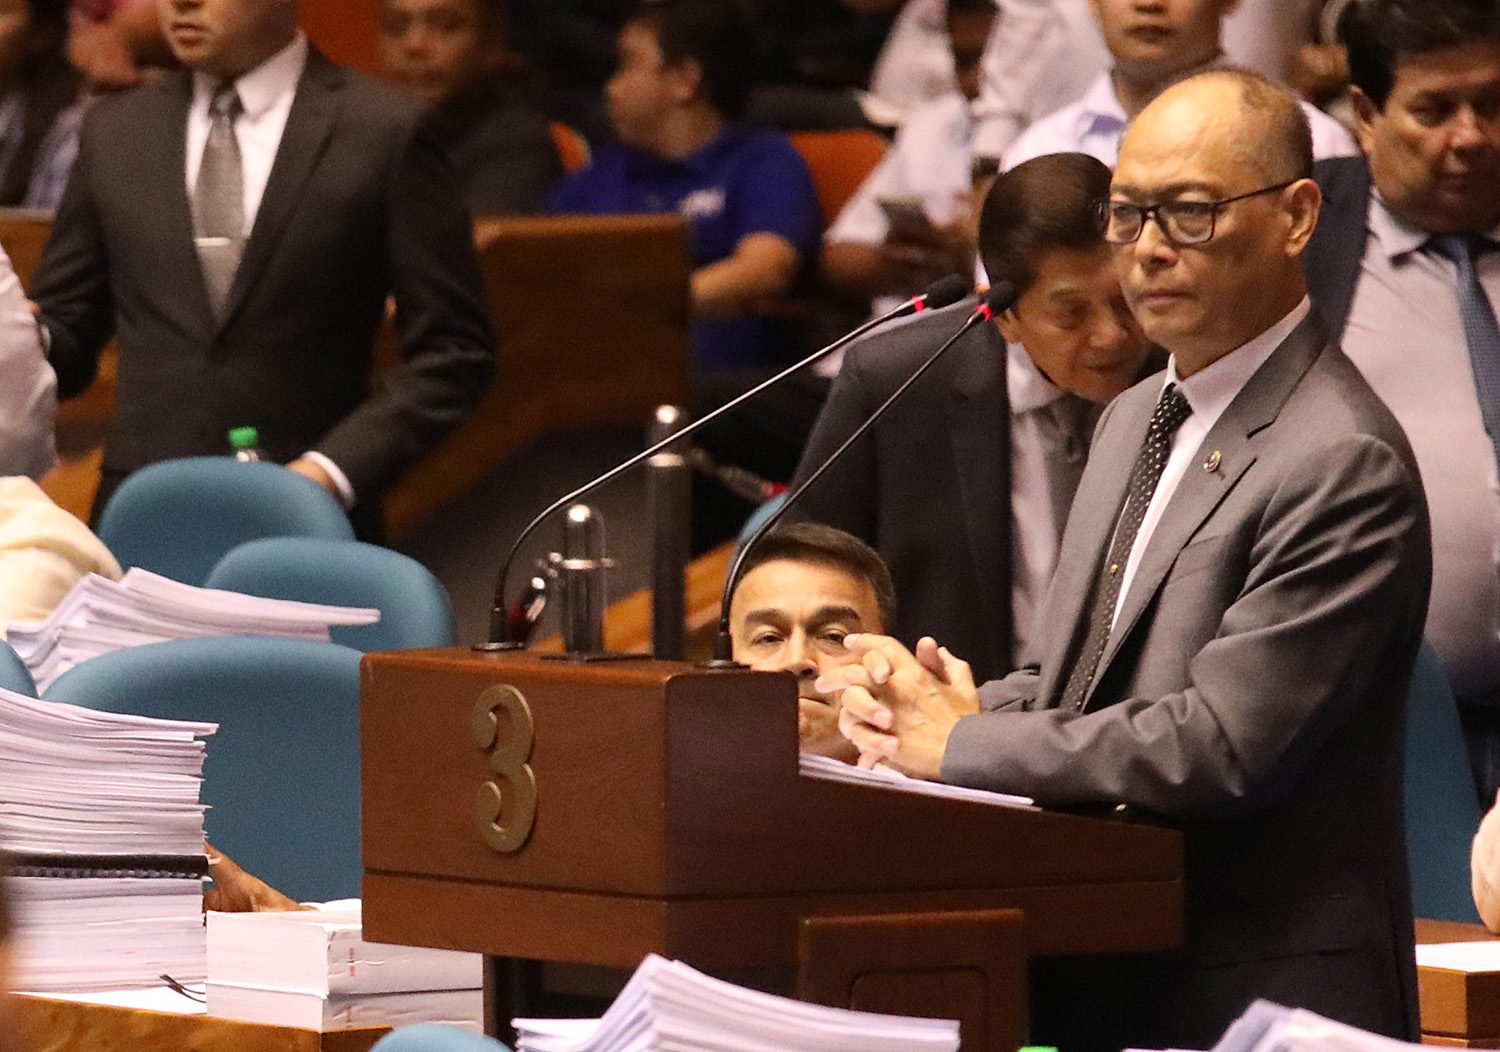 Duterte told Diokno to skip House hearing on corruption allegations – Panelo